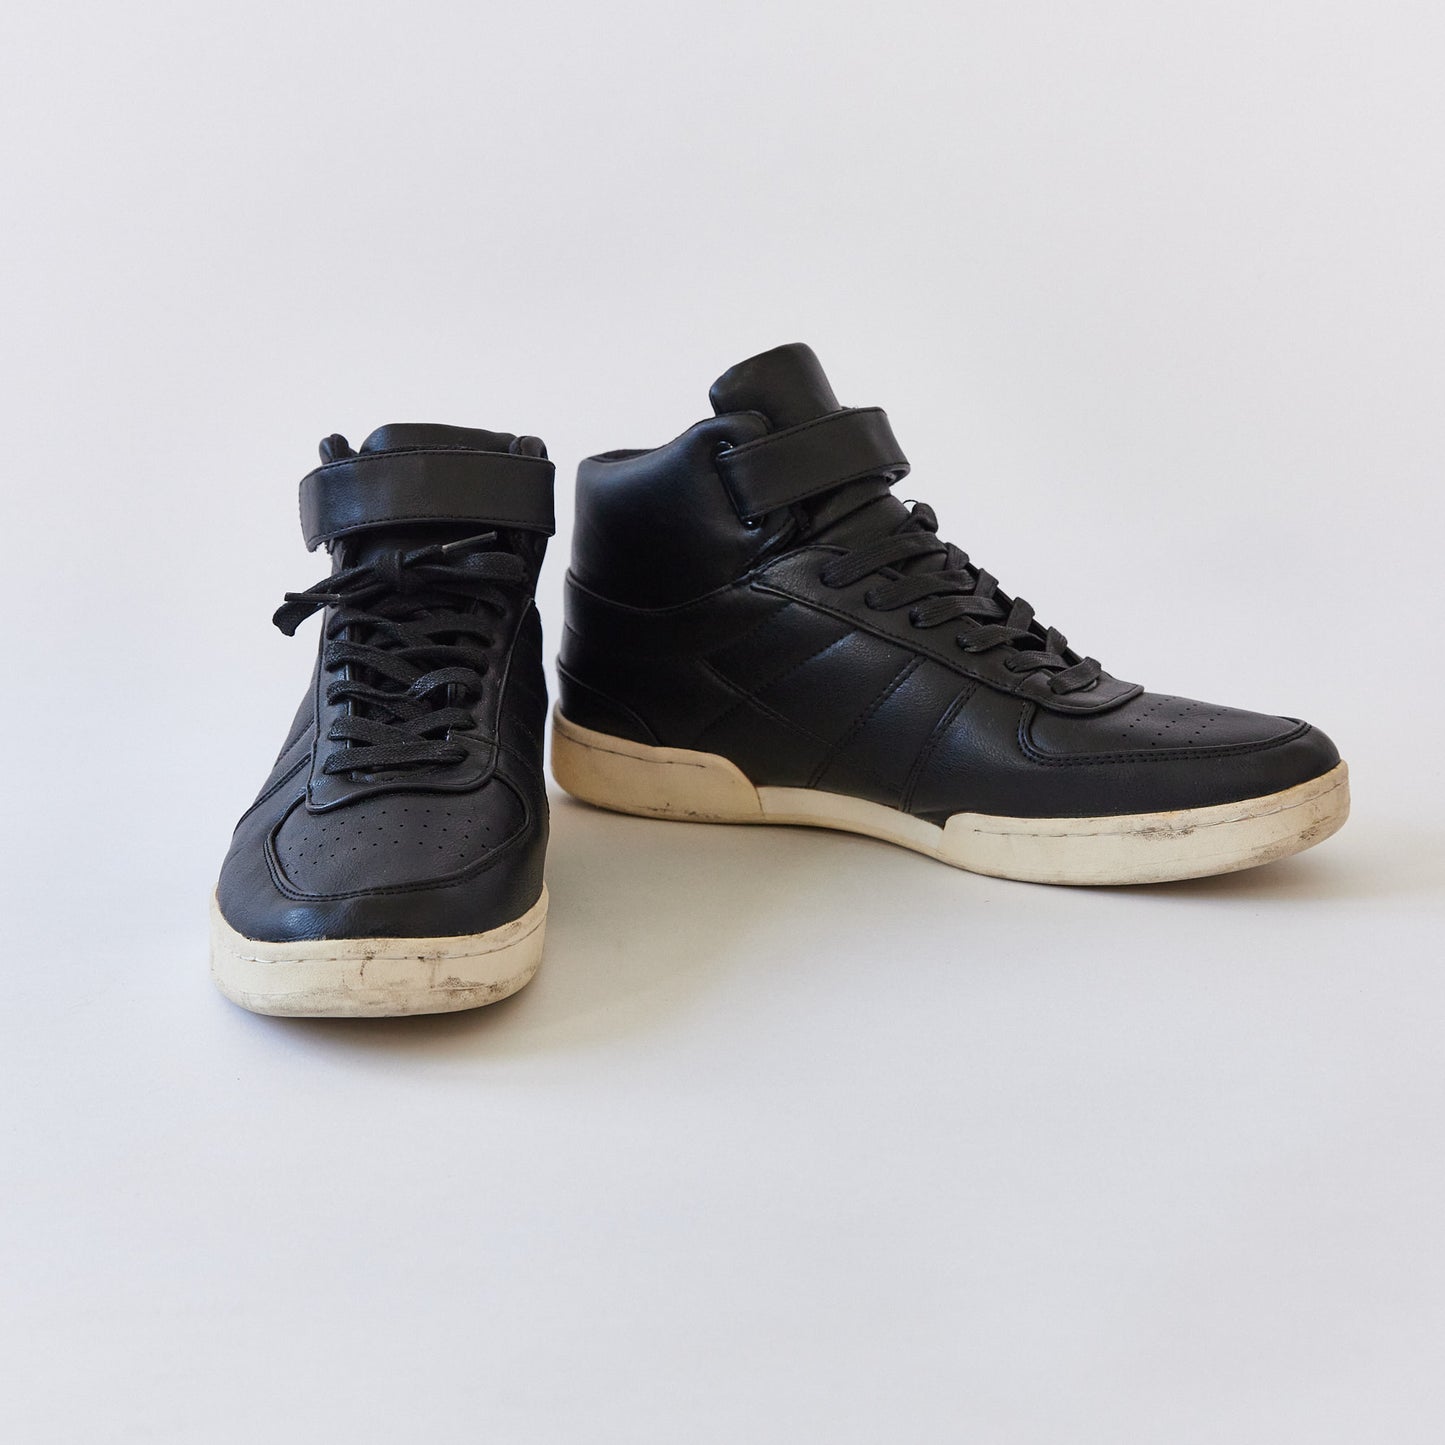 Black High top trainer size 10